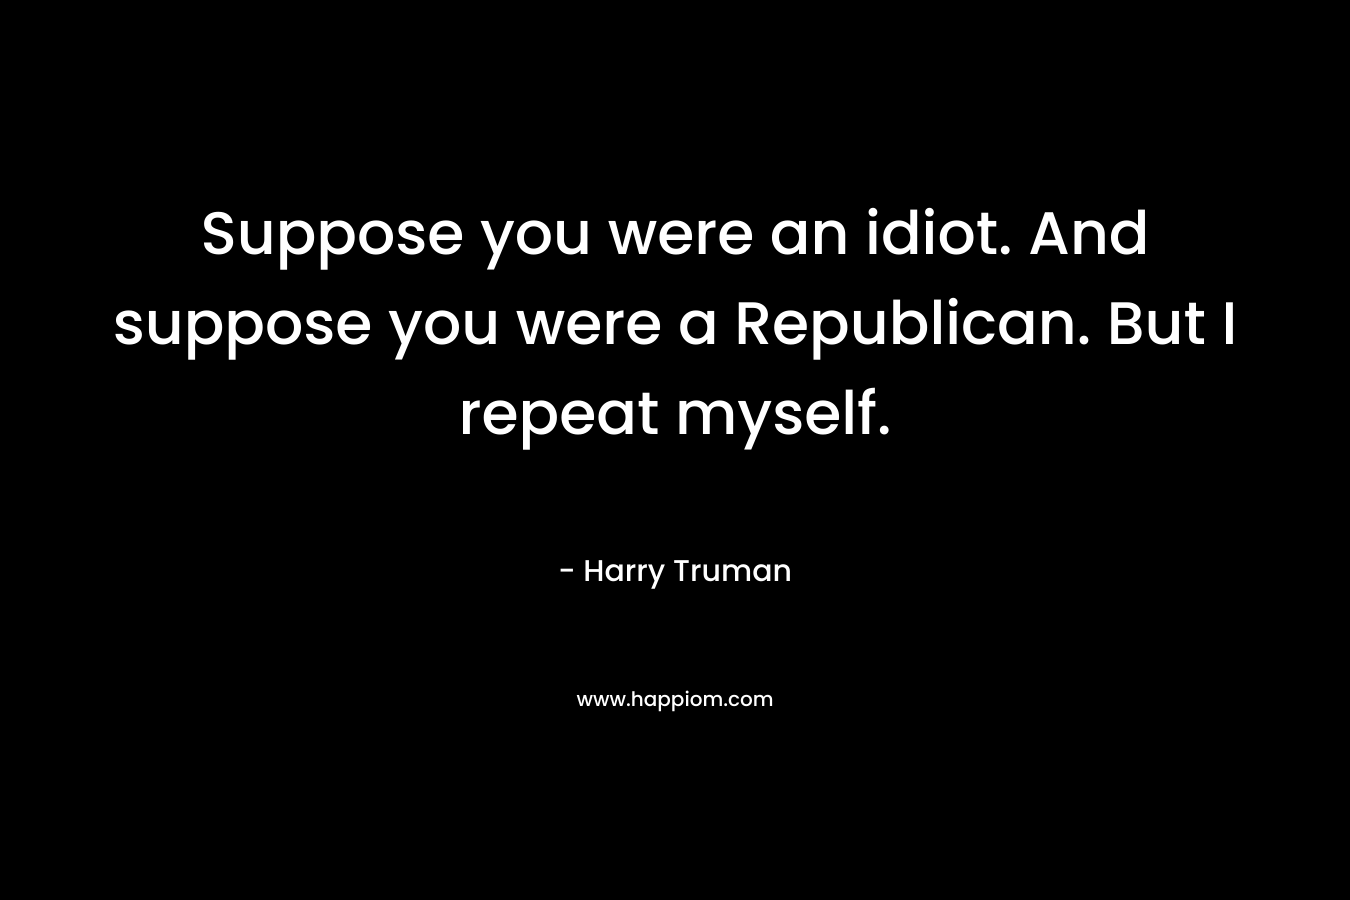 Suppose you were an idiot. And suppose you were a Republican. But I repeat myself.